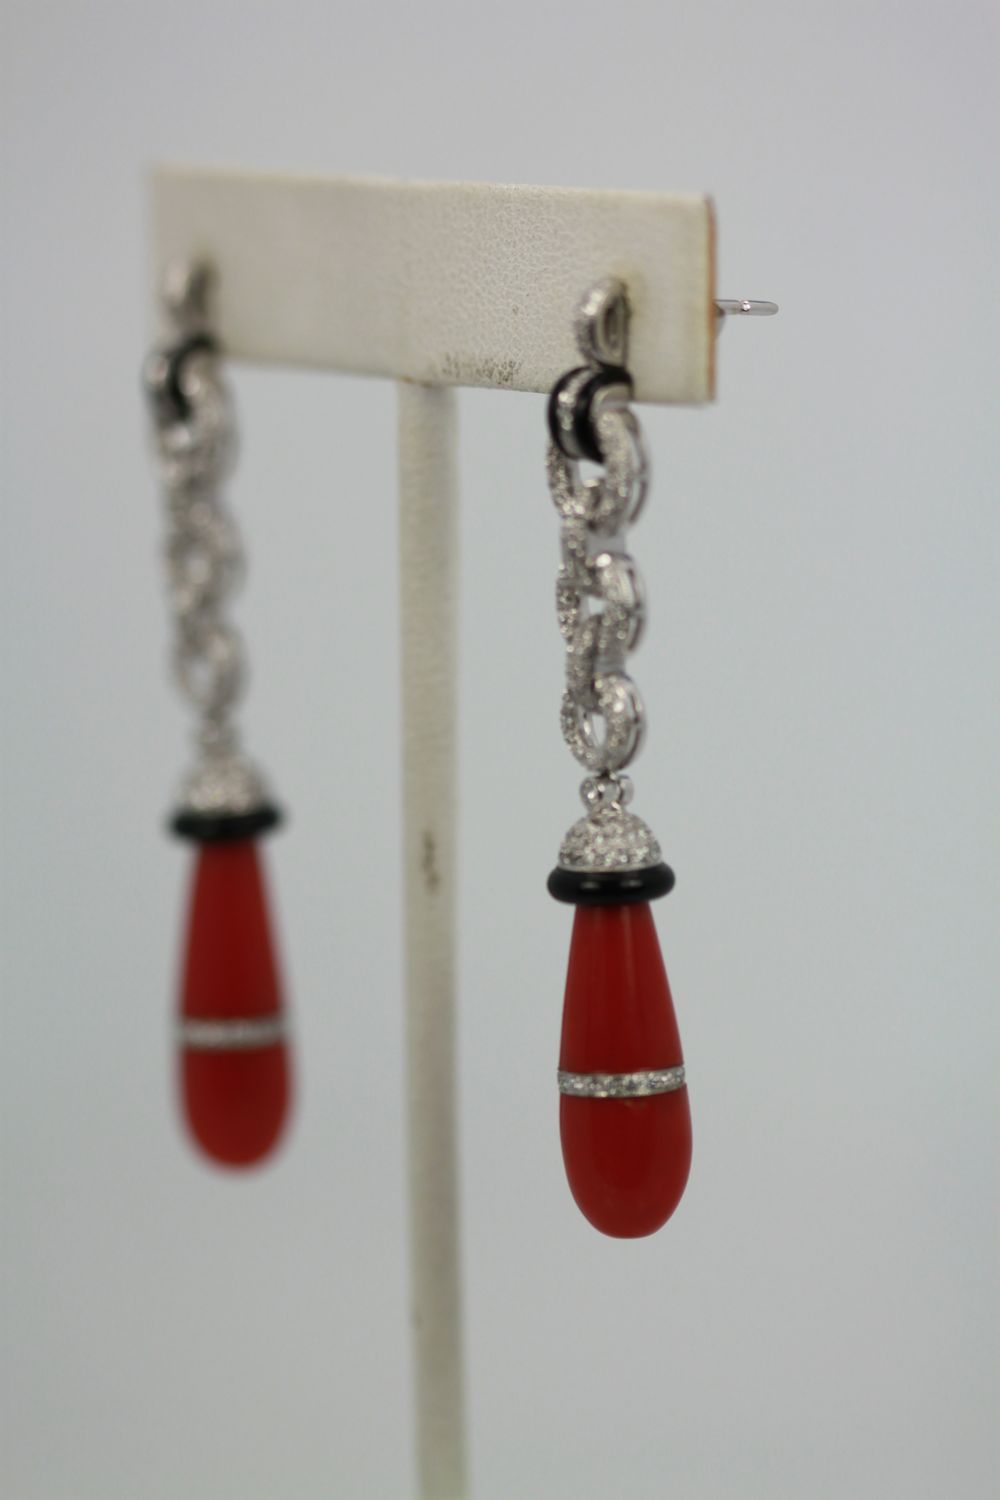 Eli Frei 18K White Gold, Coral & Onyx Drop Earrings on stand soft focus